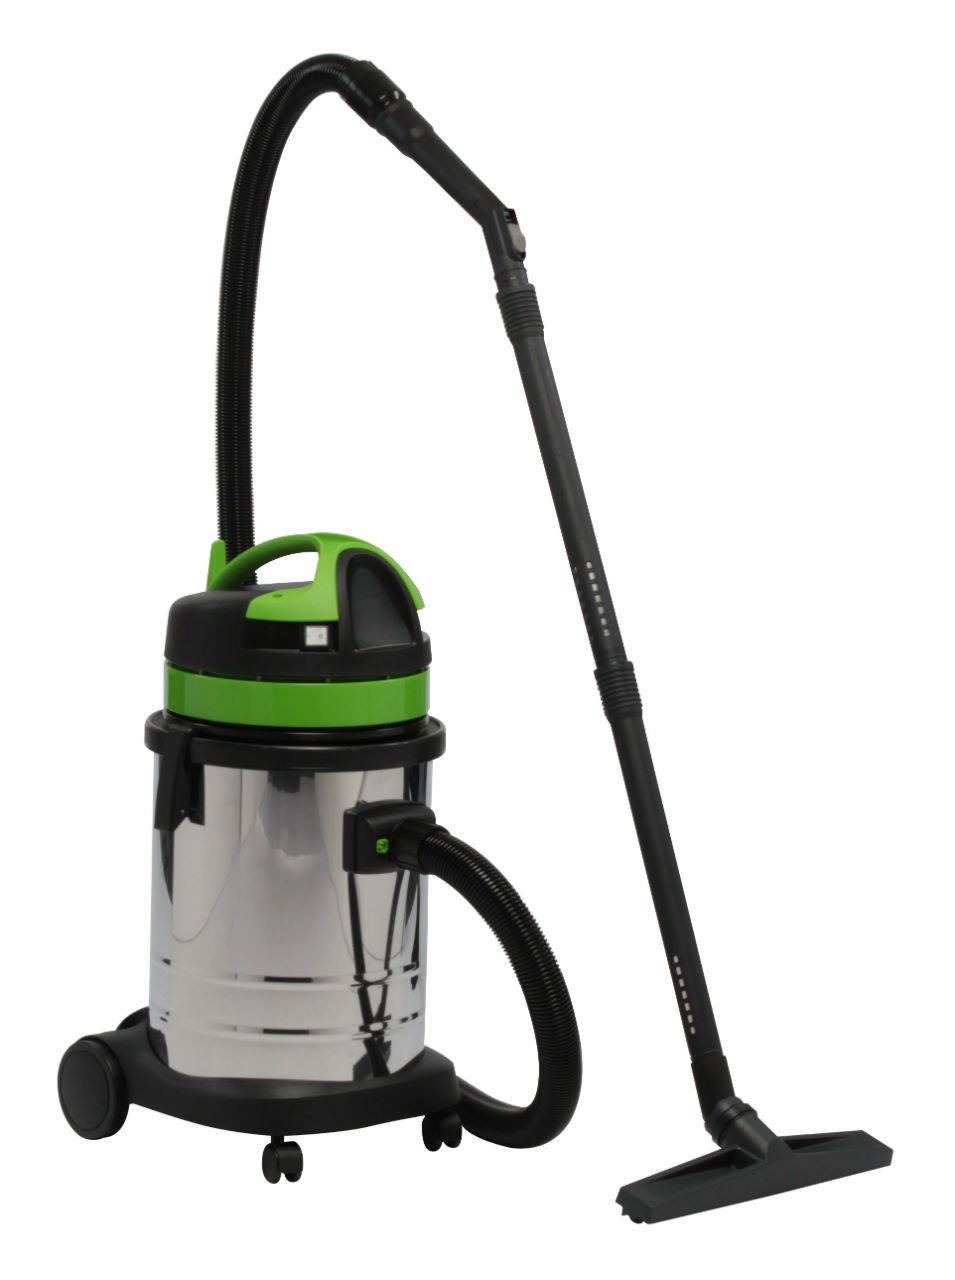 Alpha FME Introducing the IPC GS 1/33 Wet and Dry Vacuum 240v